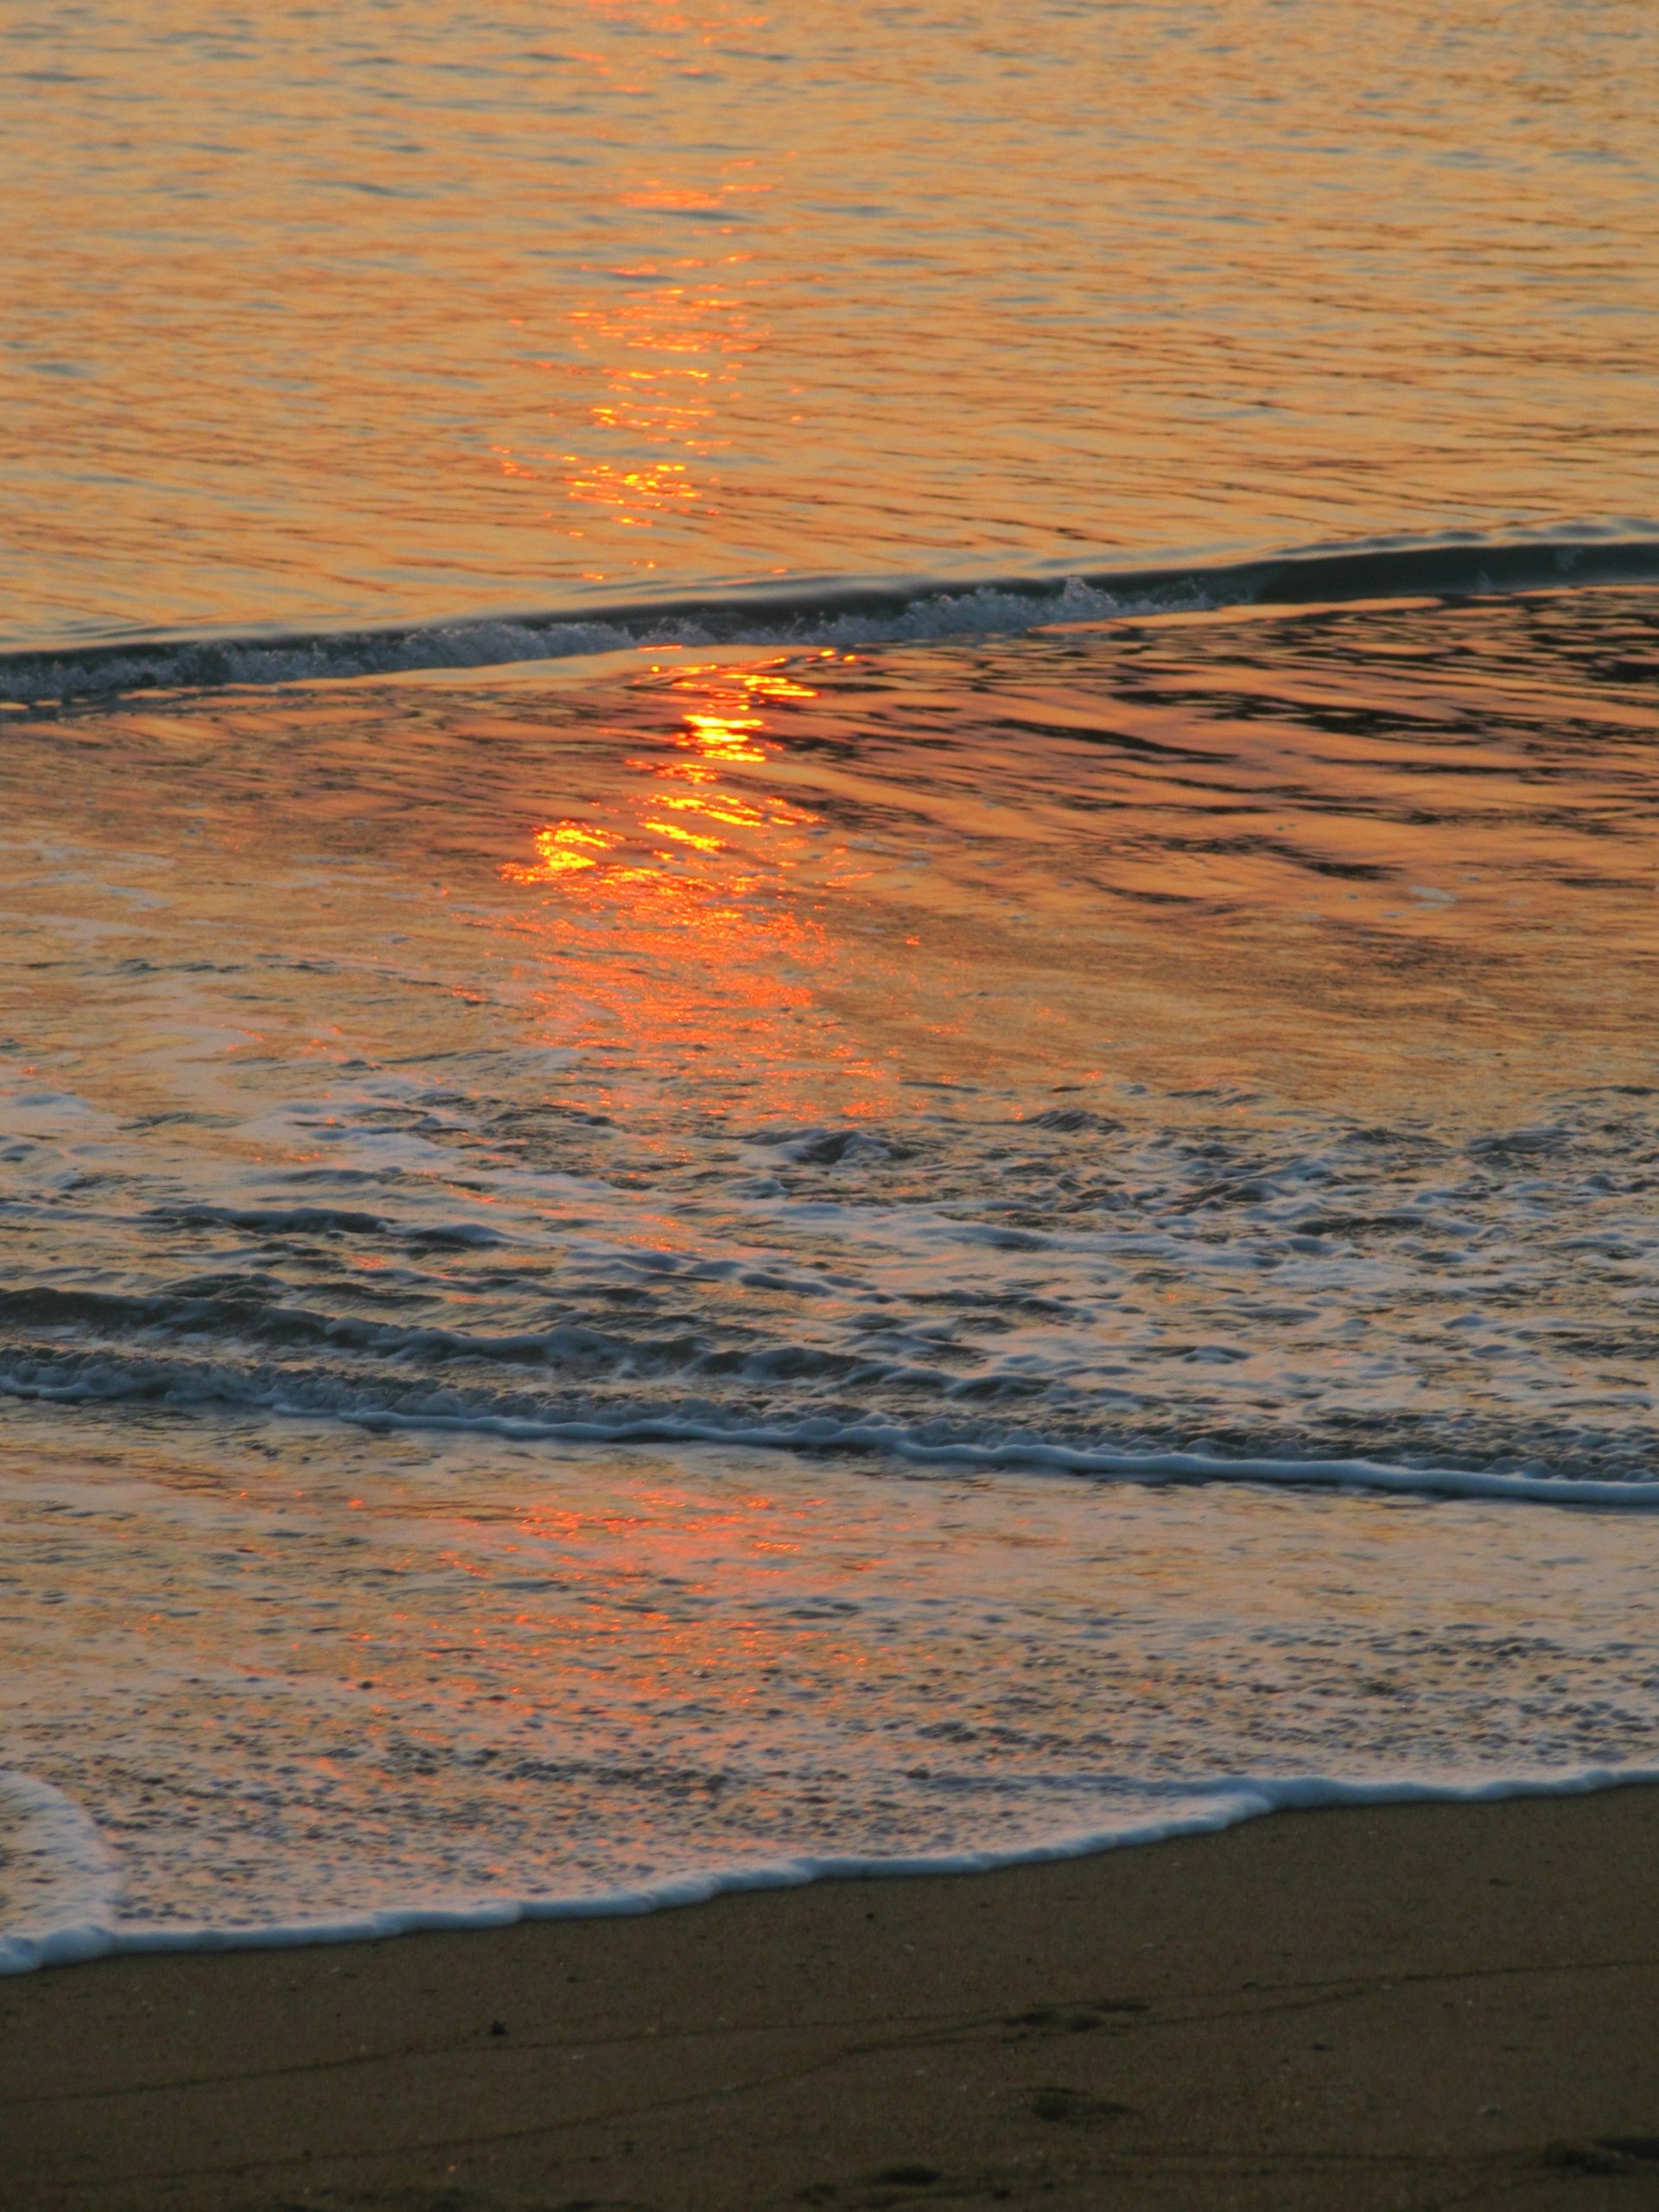 Sunset reflection in Sea